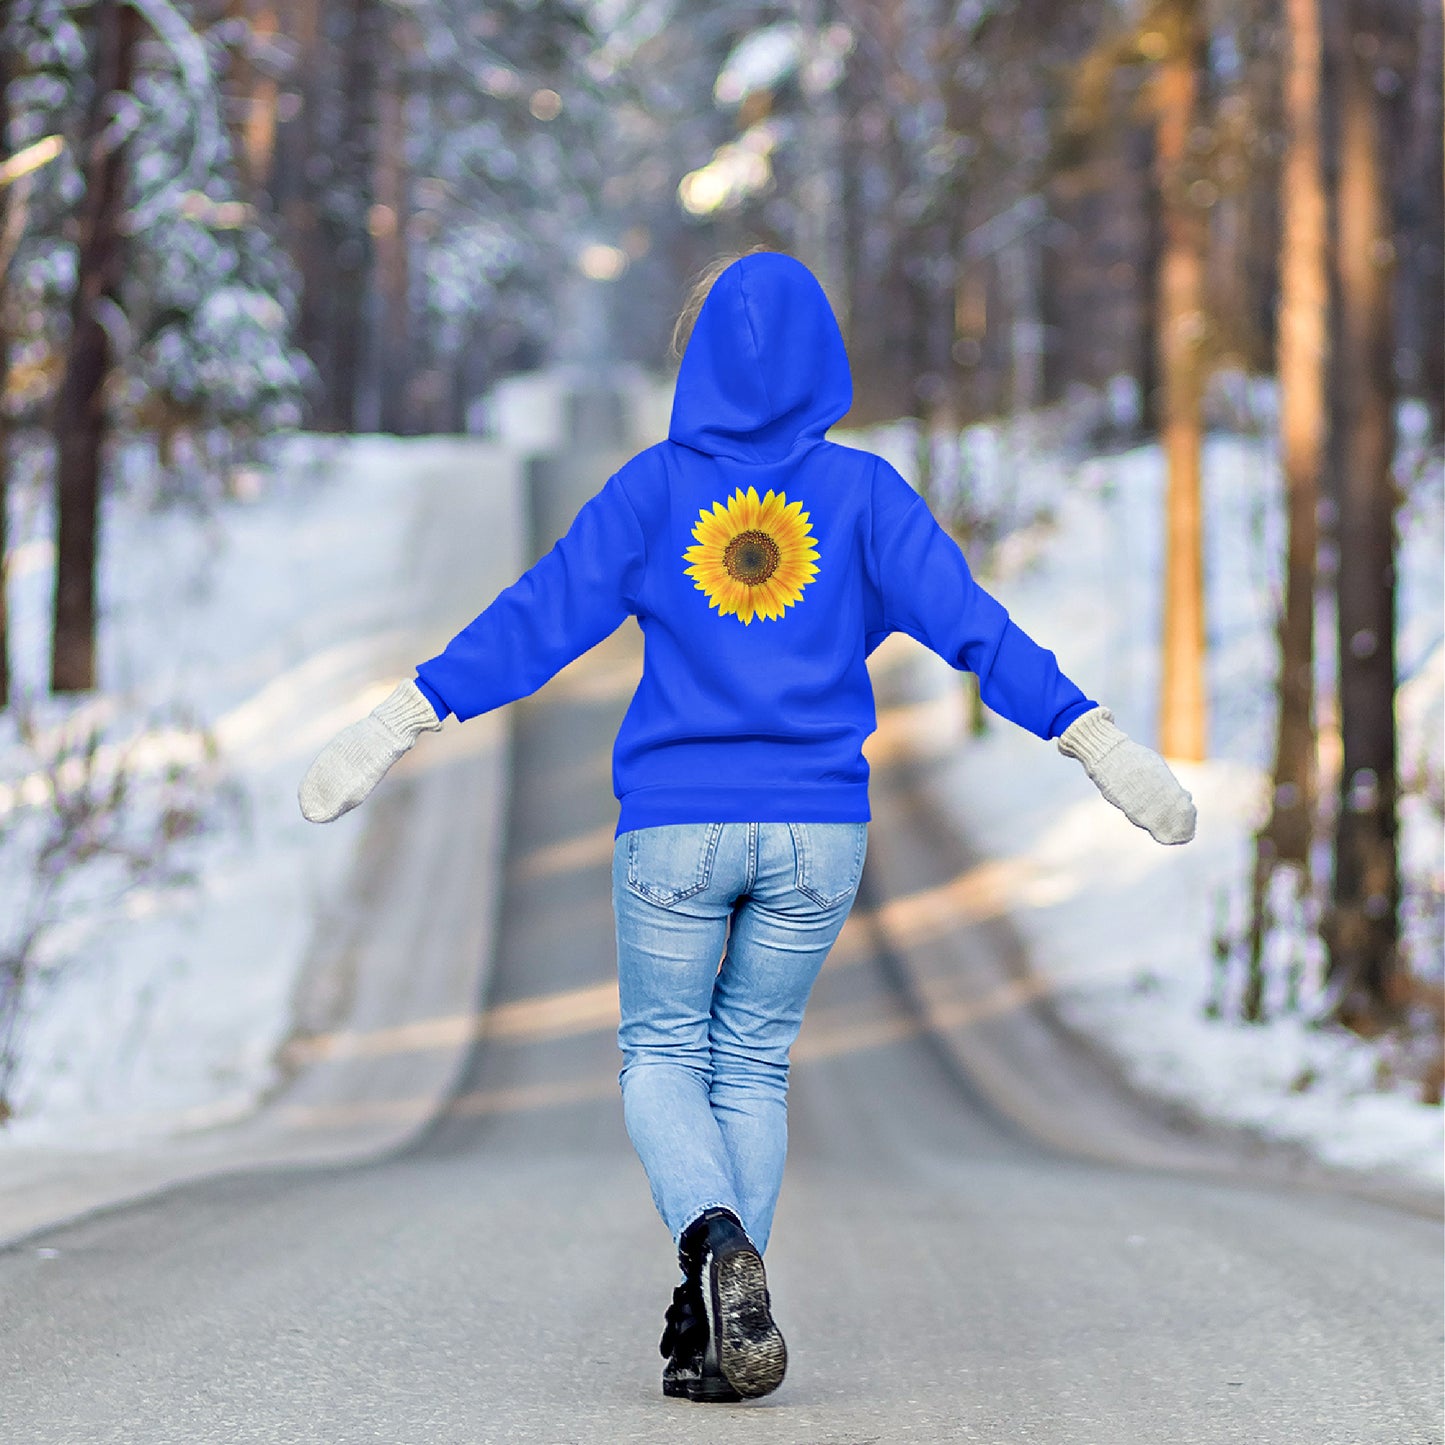 Back view of the Royal shirt as seen on a woman walking on a snowy road